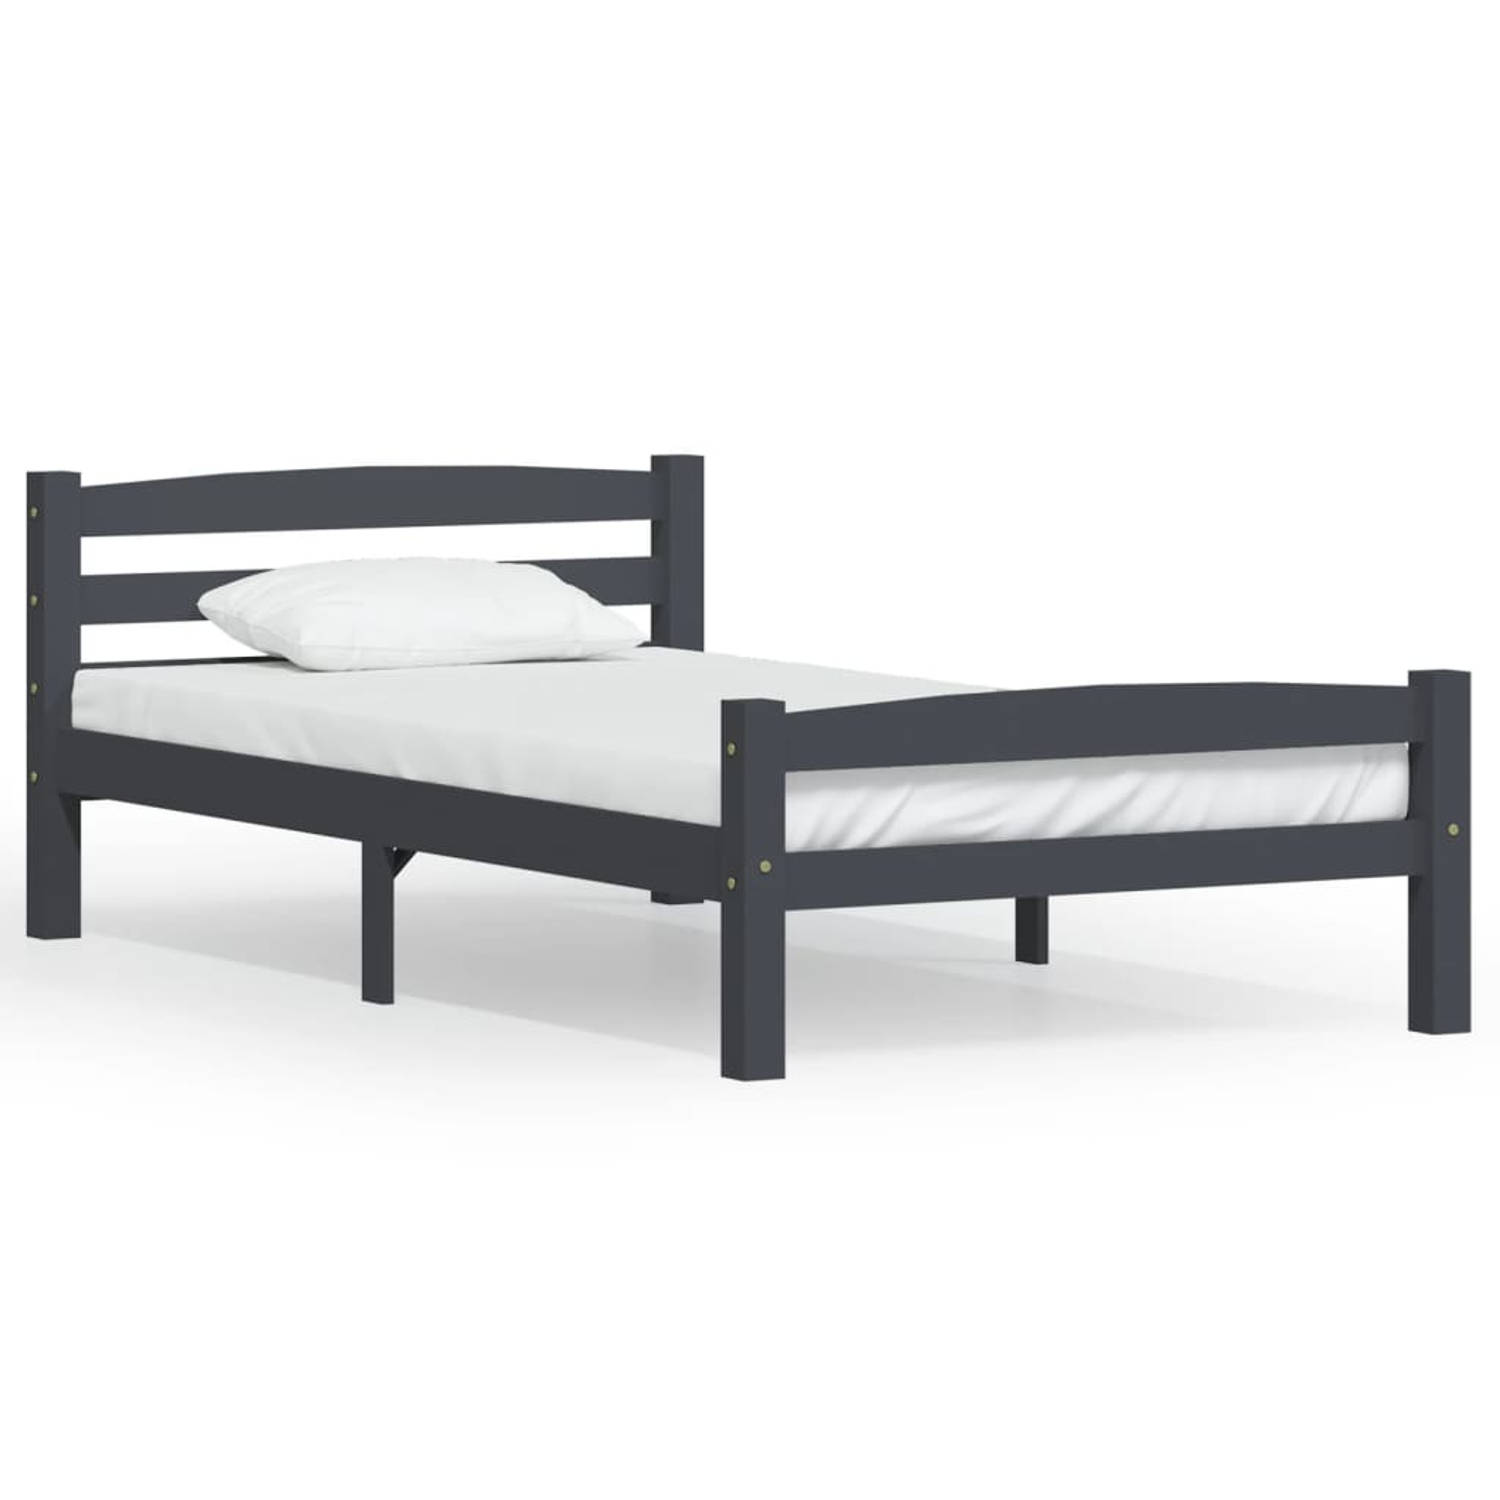 The Living Store Bedframe massief grenenhout donkergrijs 100x200 cm - Bedframe - Bedframe - Bed Frame - Bed Frames - Bed - Bedden - 1-persoonsbed - 1-persoonsbedden - Eenpersoons B